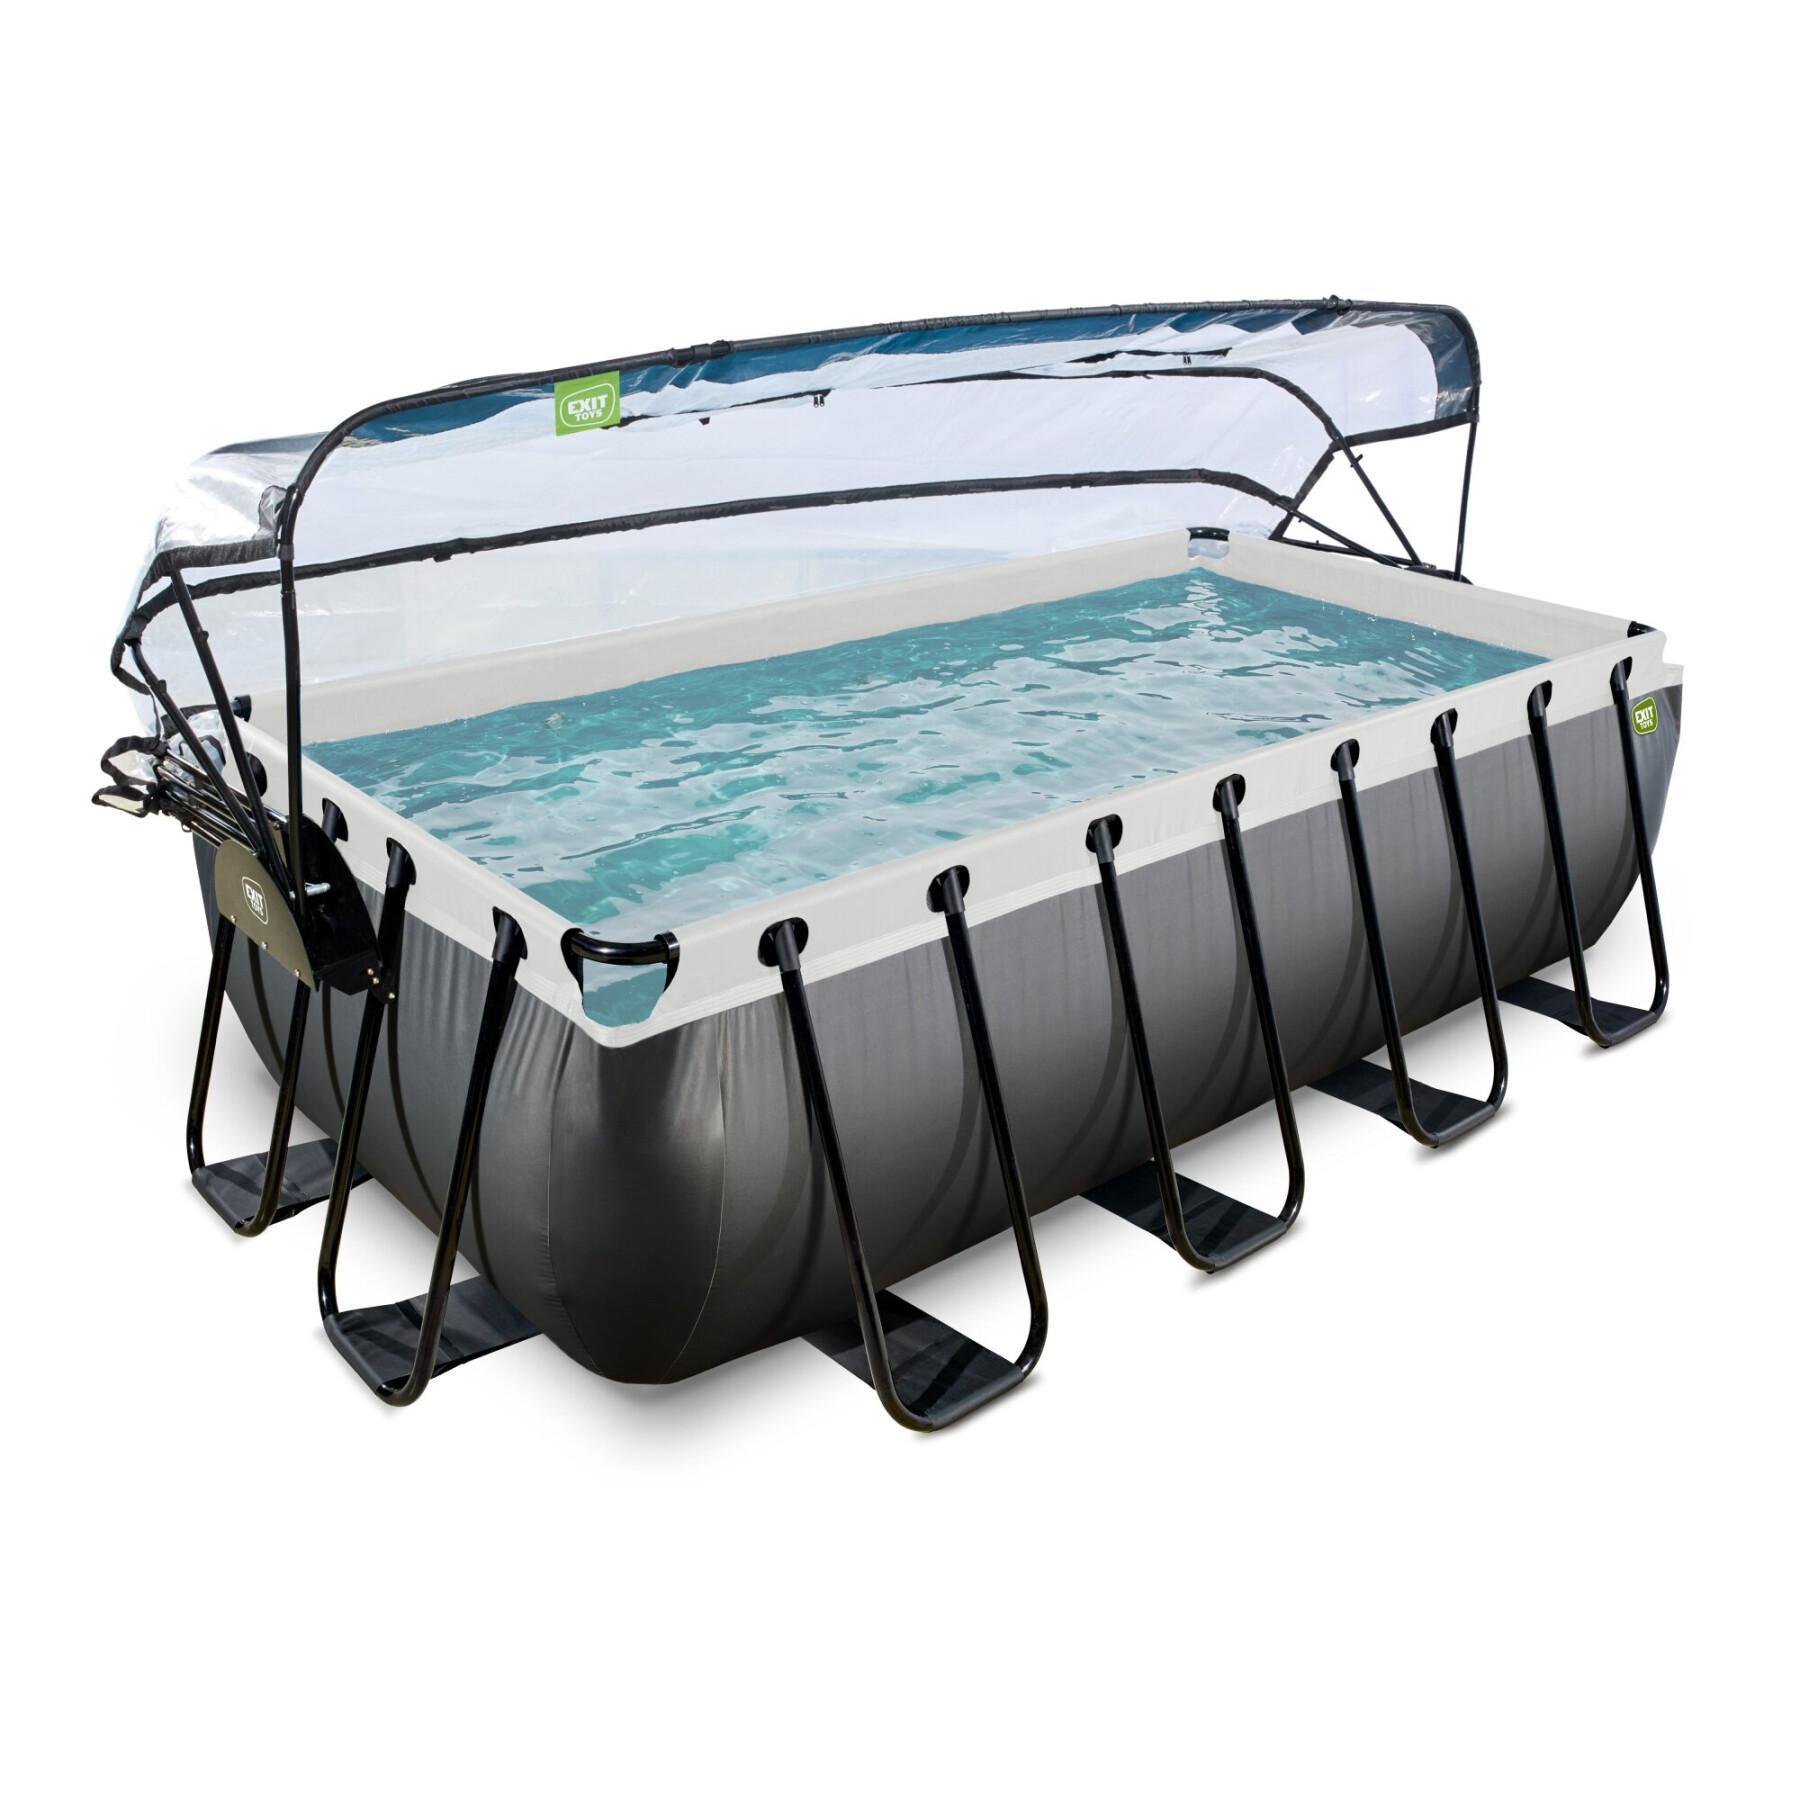 Swimming pool with sand filter pump and leather dome for children Exit Toys 400 x 200 x 100 cm